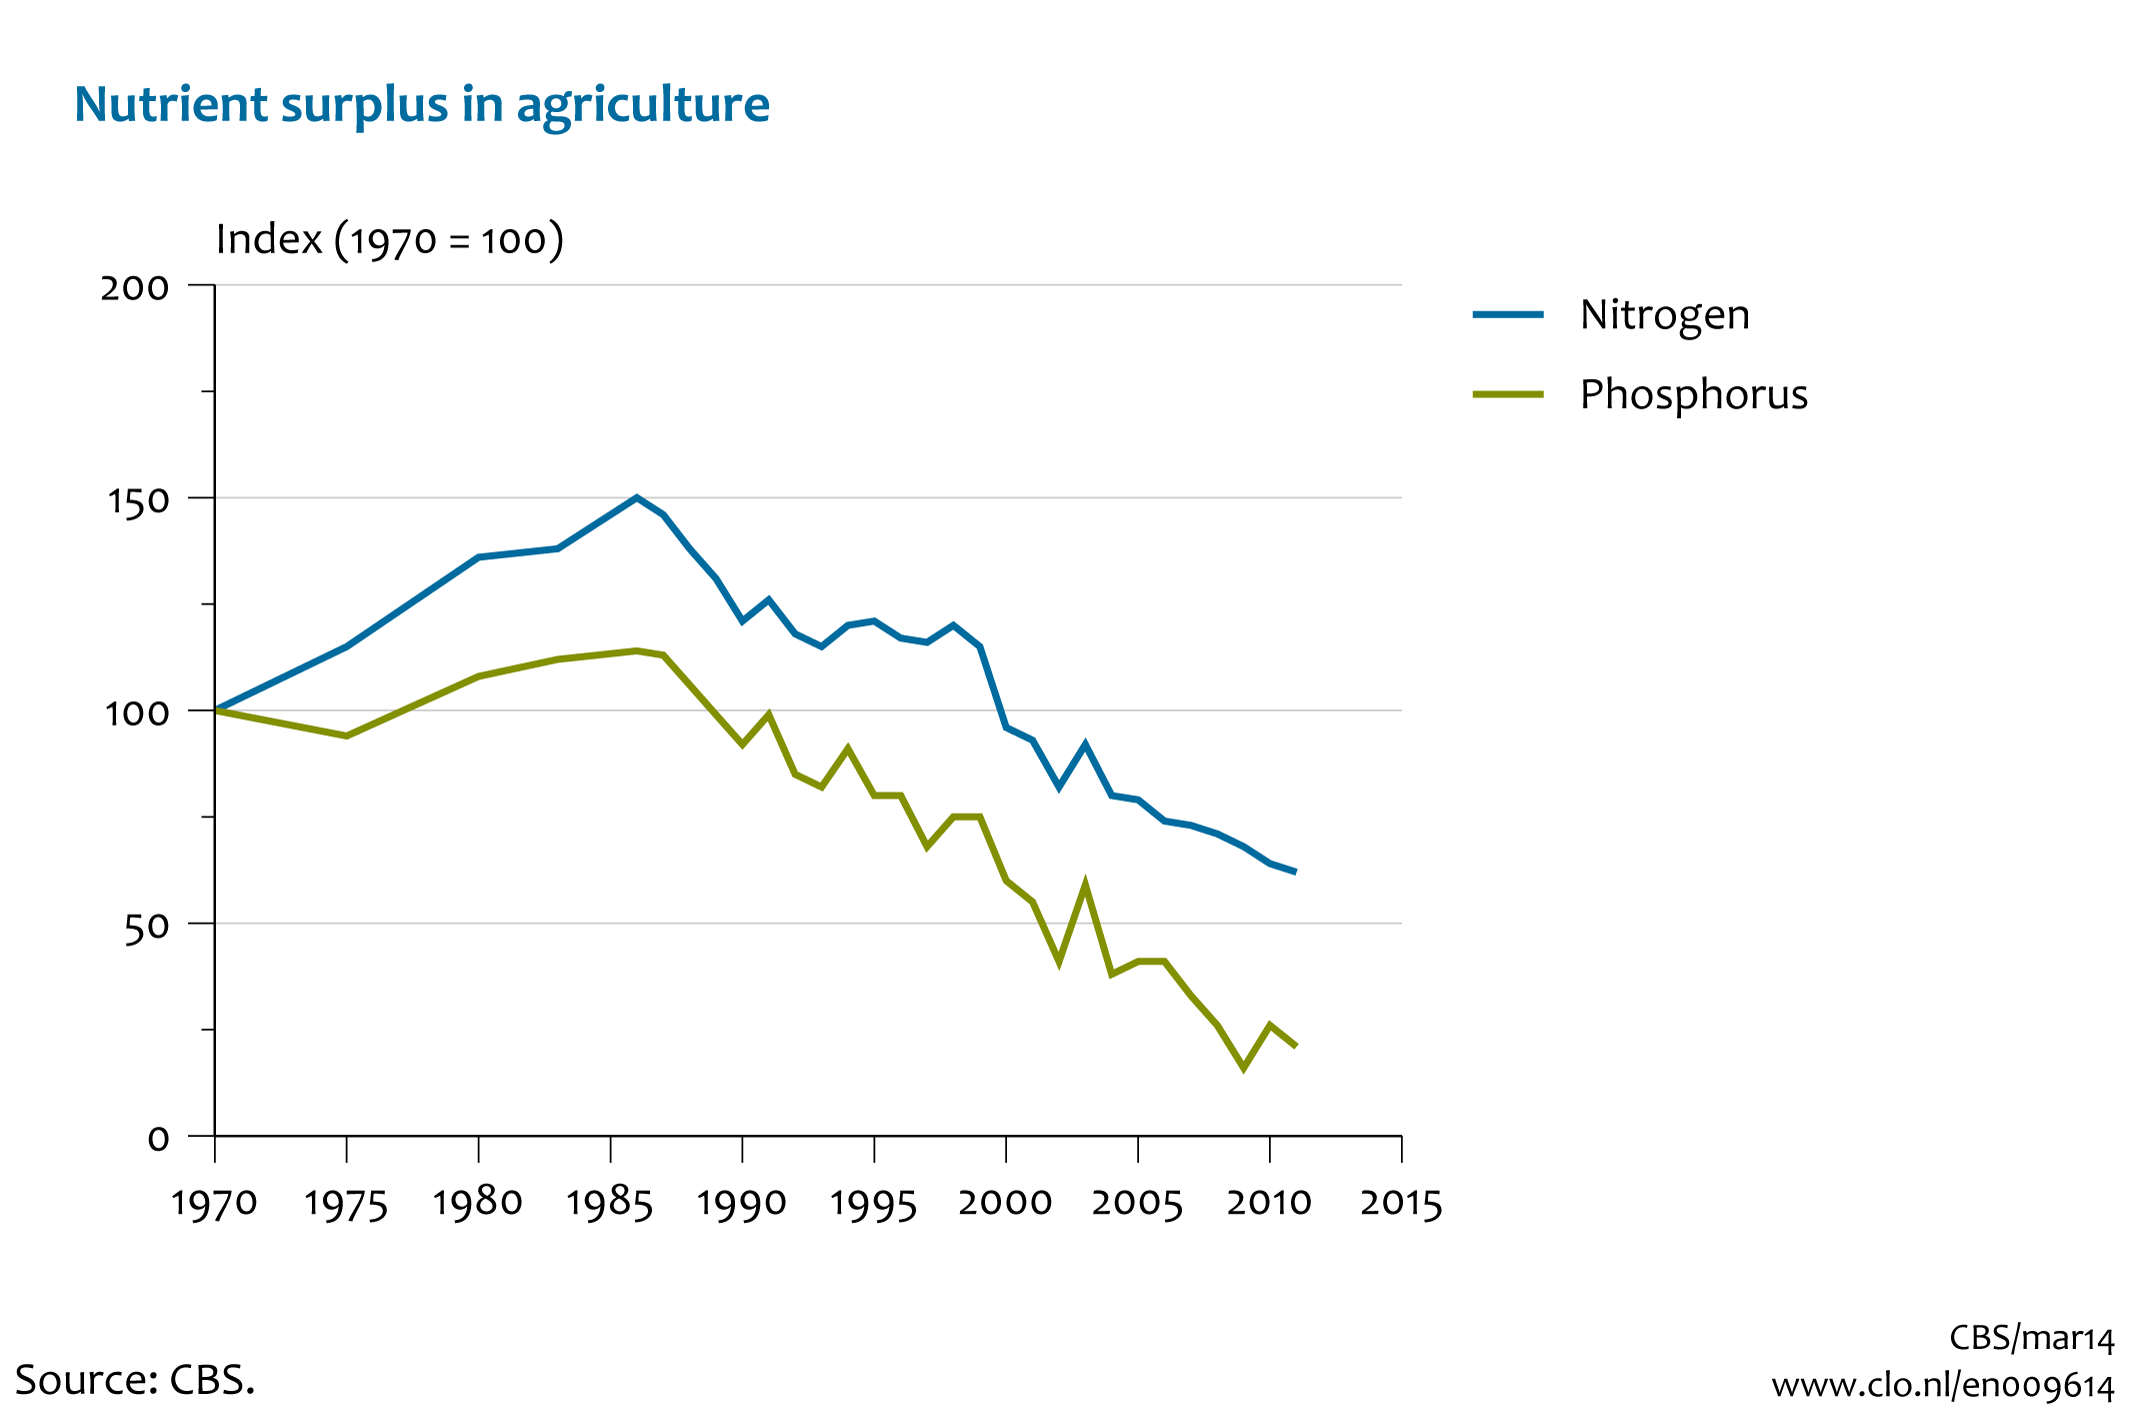 Image Nutrient surplus in agriculture. The image is further explained in the text.